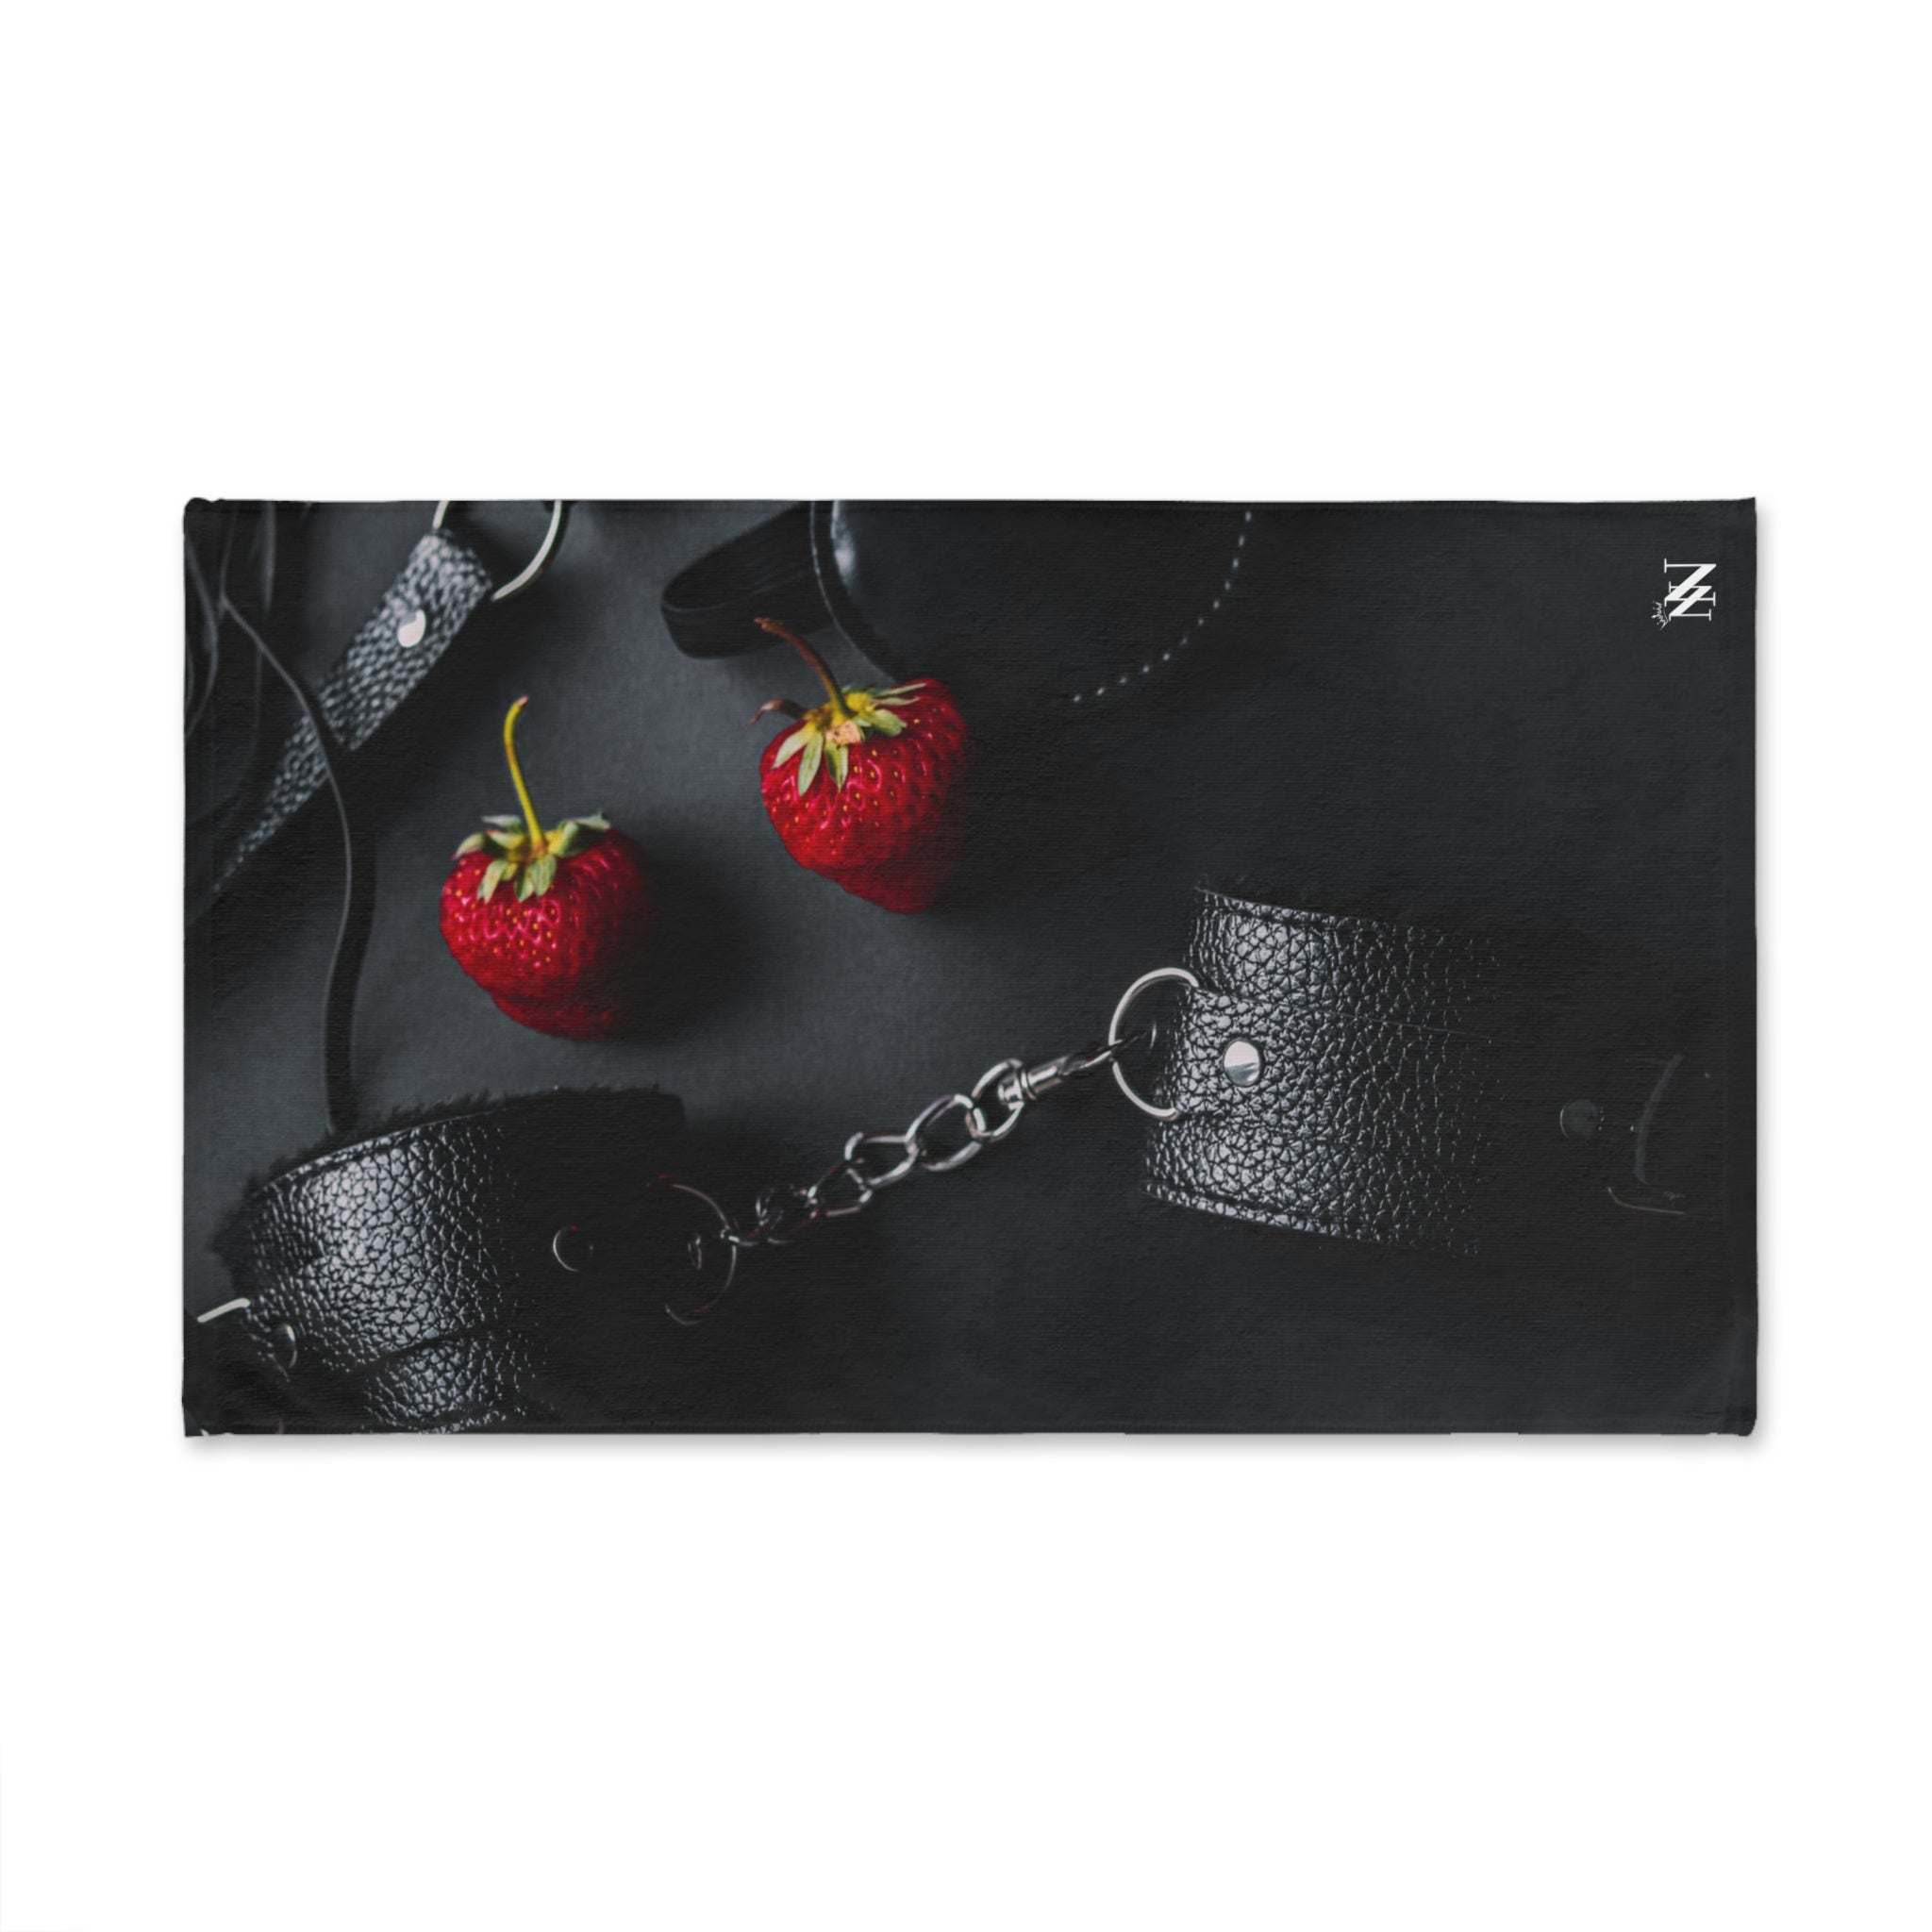 Strawberries Cuffs White | Funny Gifts for Men - Gifts for Him - Birthday Gifts for Men, Him, Her, Husband, Boyfriend, Girlfriend, New Couple Gifts, Fathers & Valentines Day Gifts, Christmas Gifts NECTAR NAPKINS